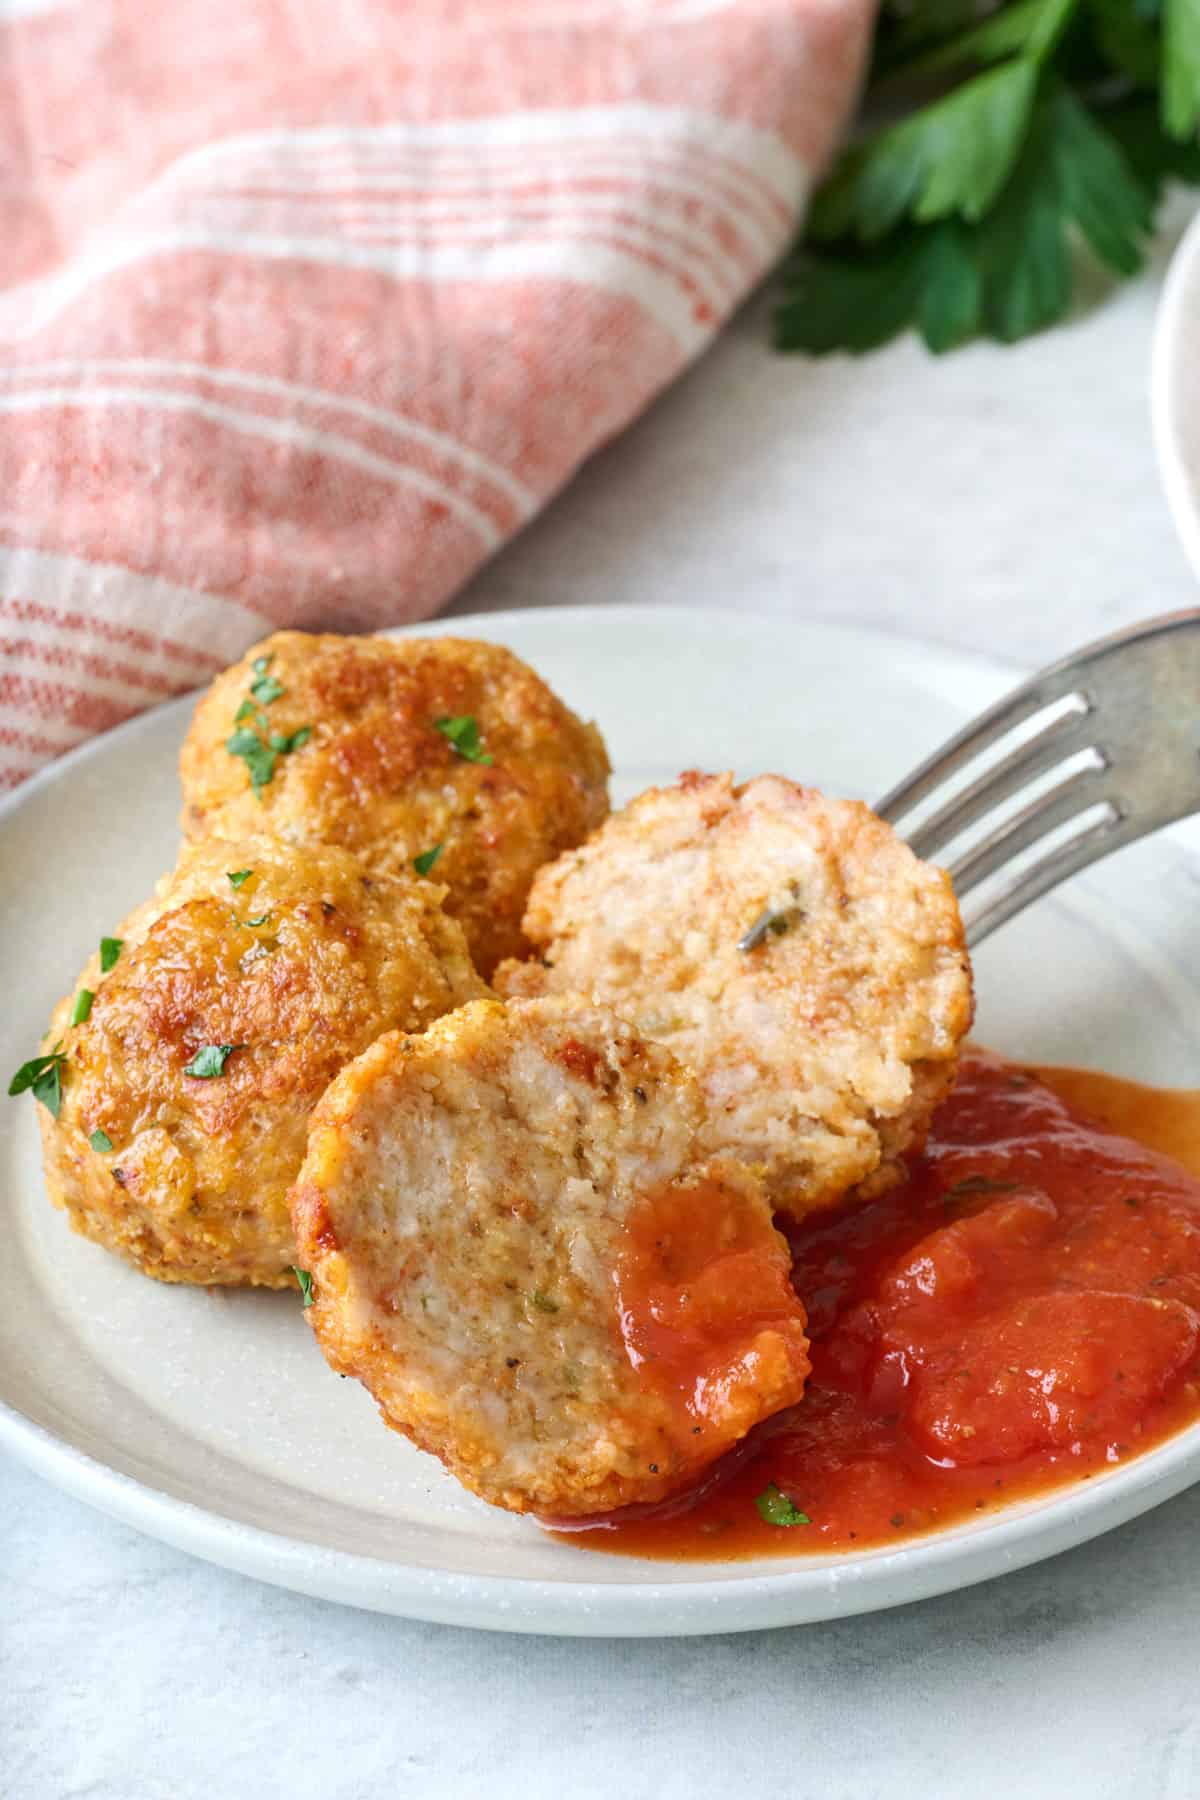 A few chicken meatballs with parmesan on a plate with one cut in half to show inside texture, marinara on plate with meatballs.